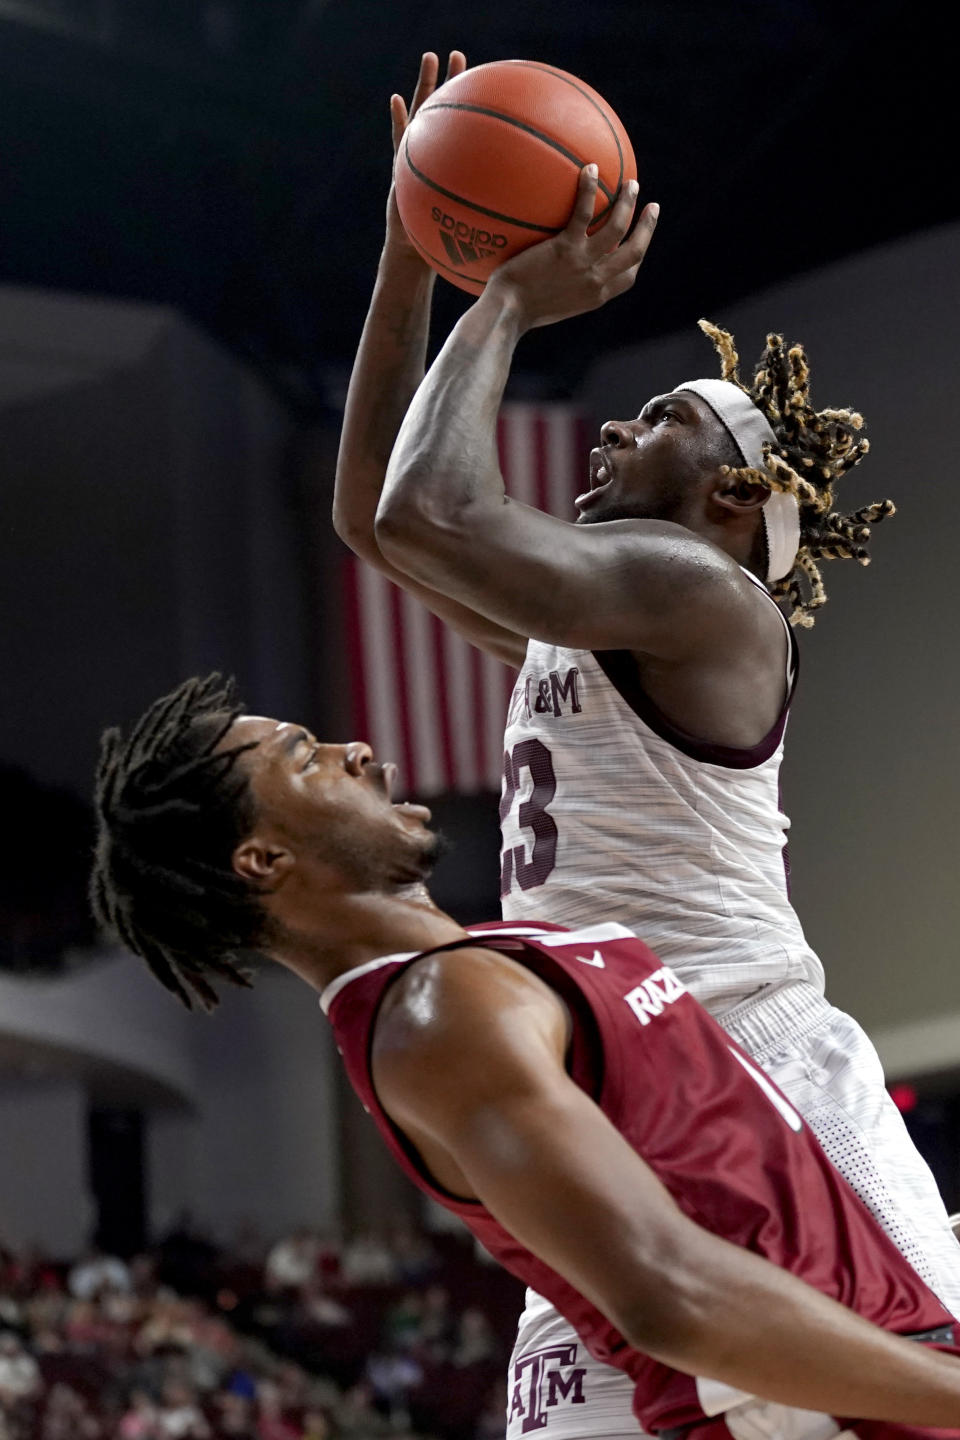 Texas A&M guard Tyrece Radford (23) drives to the basket as he is fouled by Arkansas guard Stanley Umude (0) during the second half of an NCAA college basketball game Saturday, Jan. 8, 2022, in College Station, Texas. (AP Photo/Sam Craft)